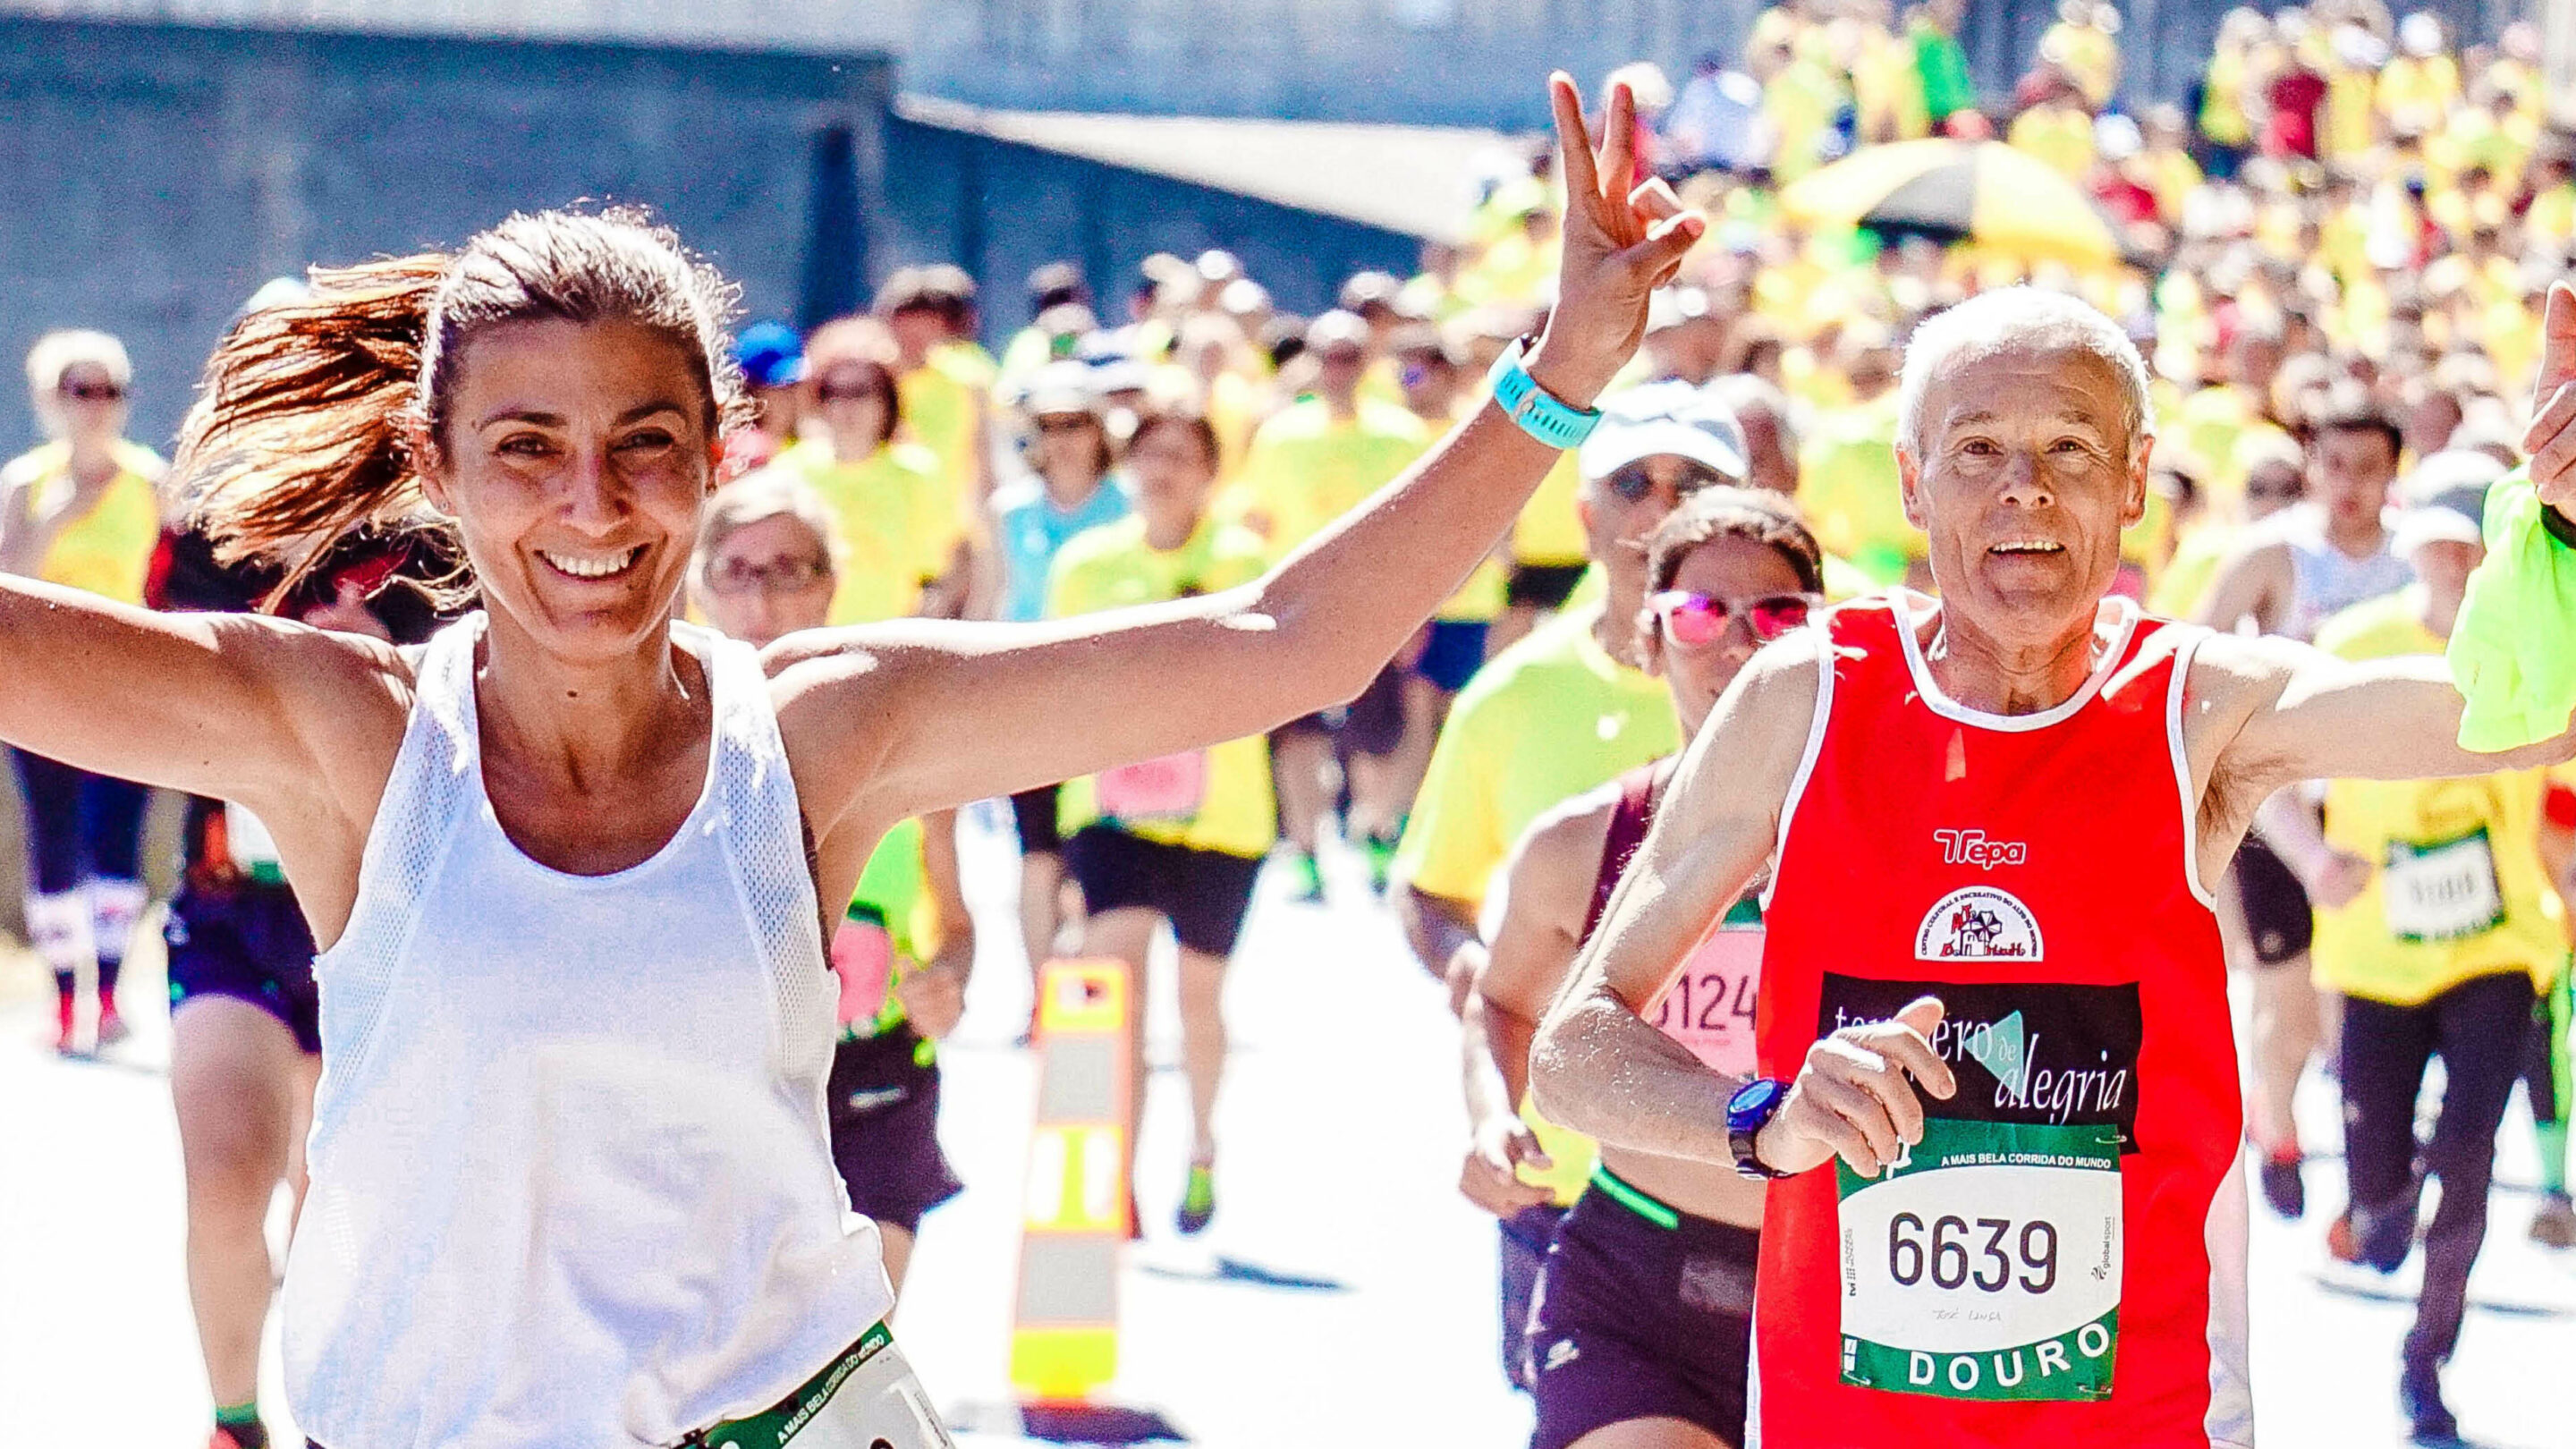 Large group of runners participating in a marathon, one older man has his thumb up, a younger woman has her arms raised in happiness and smiling at the camera.